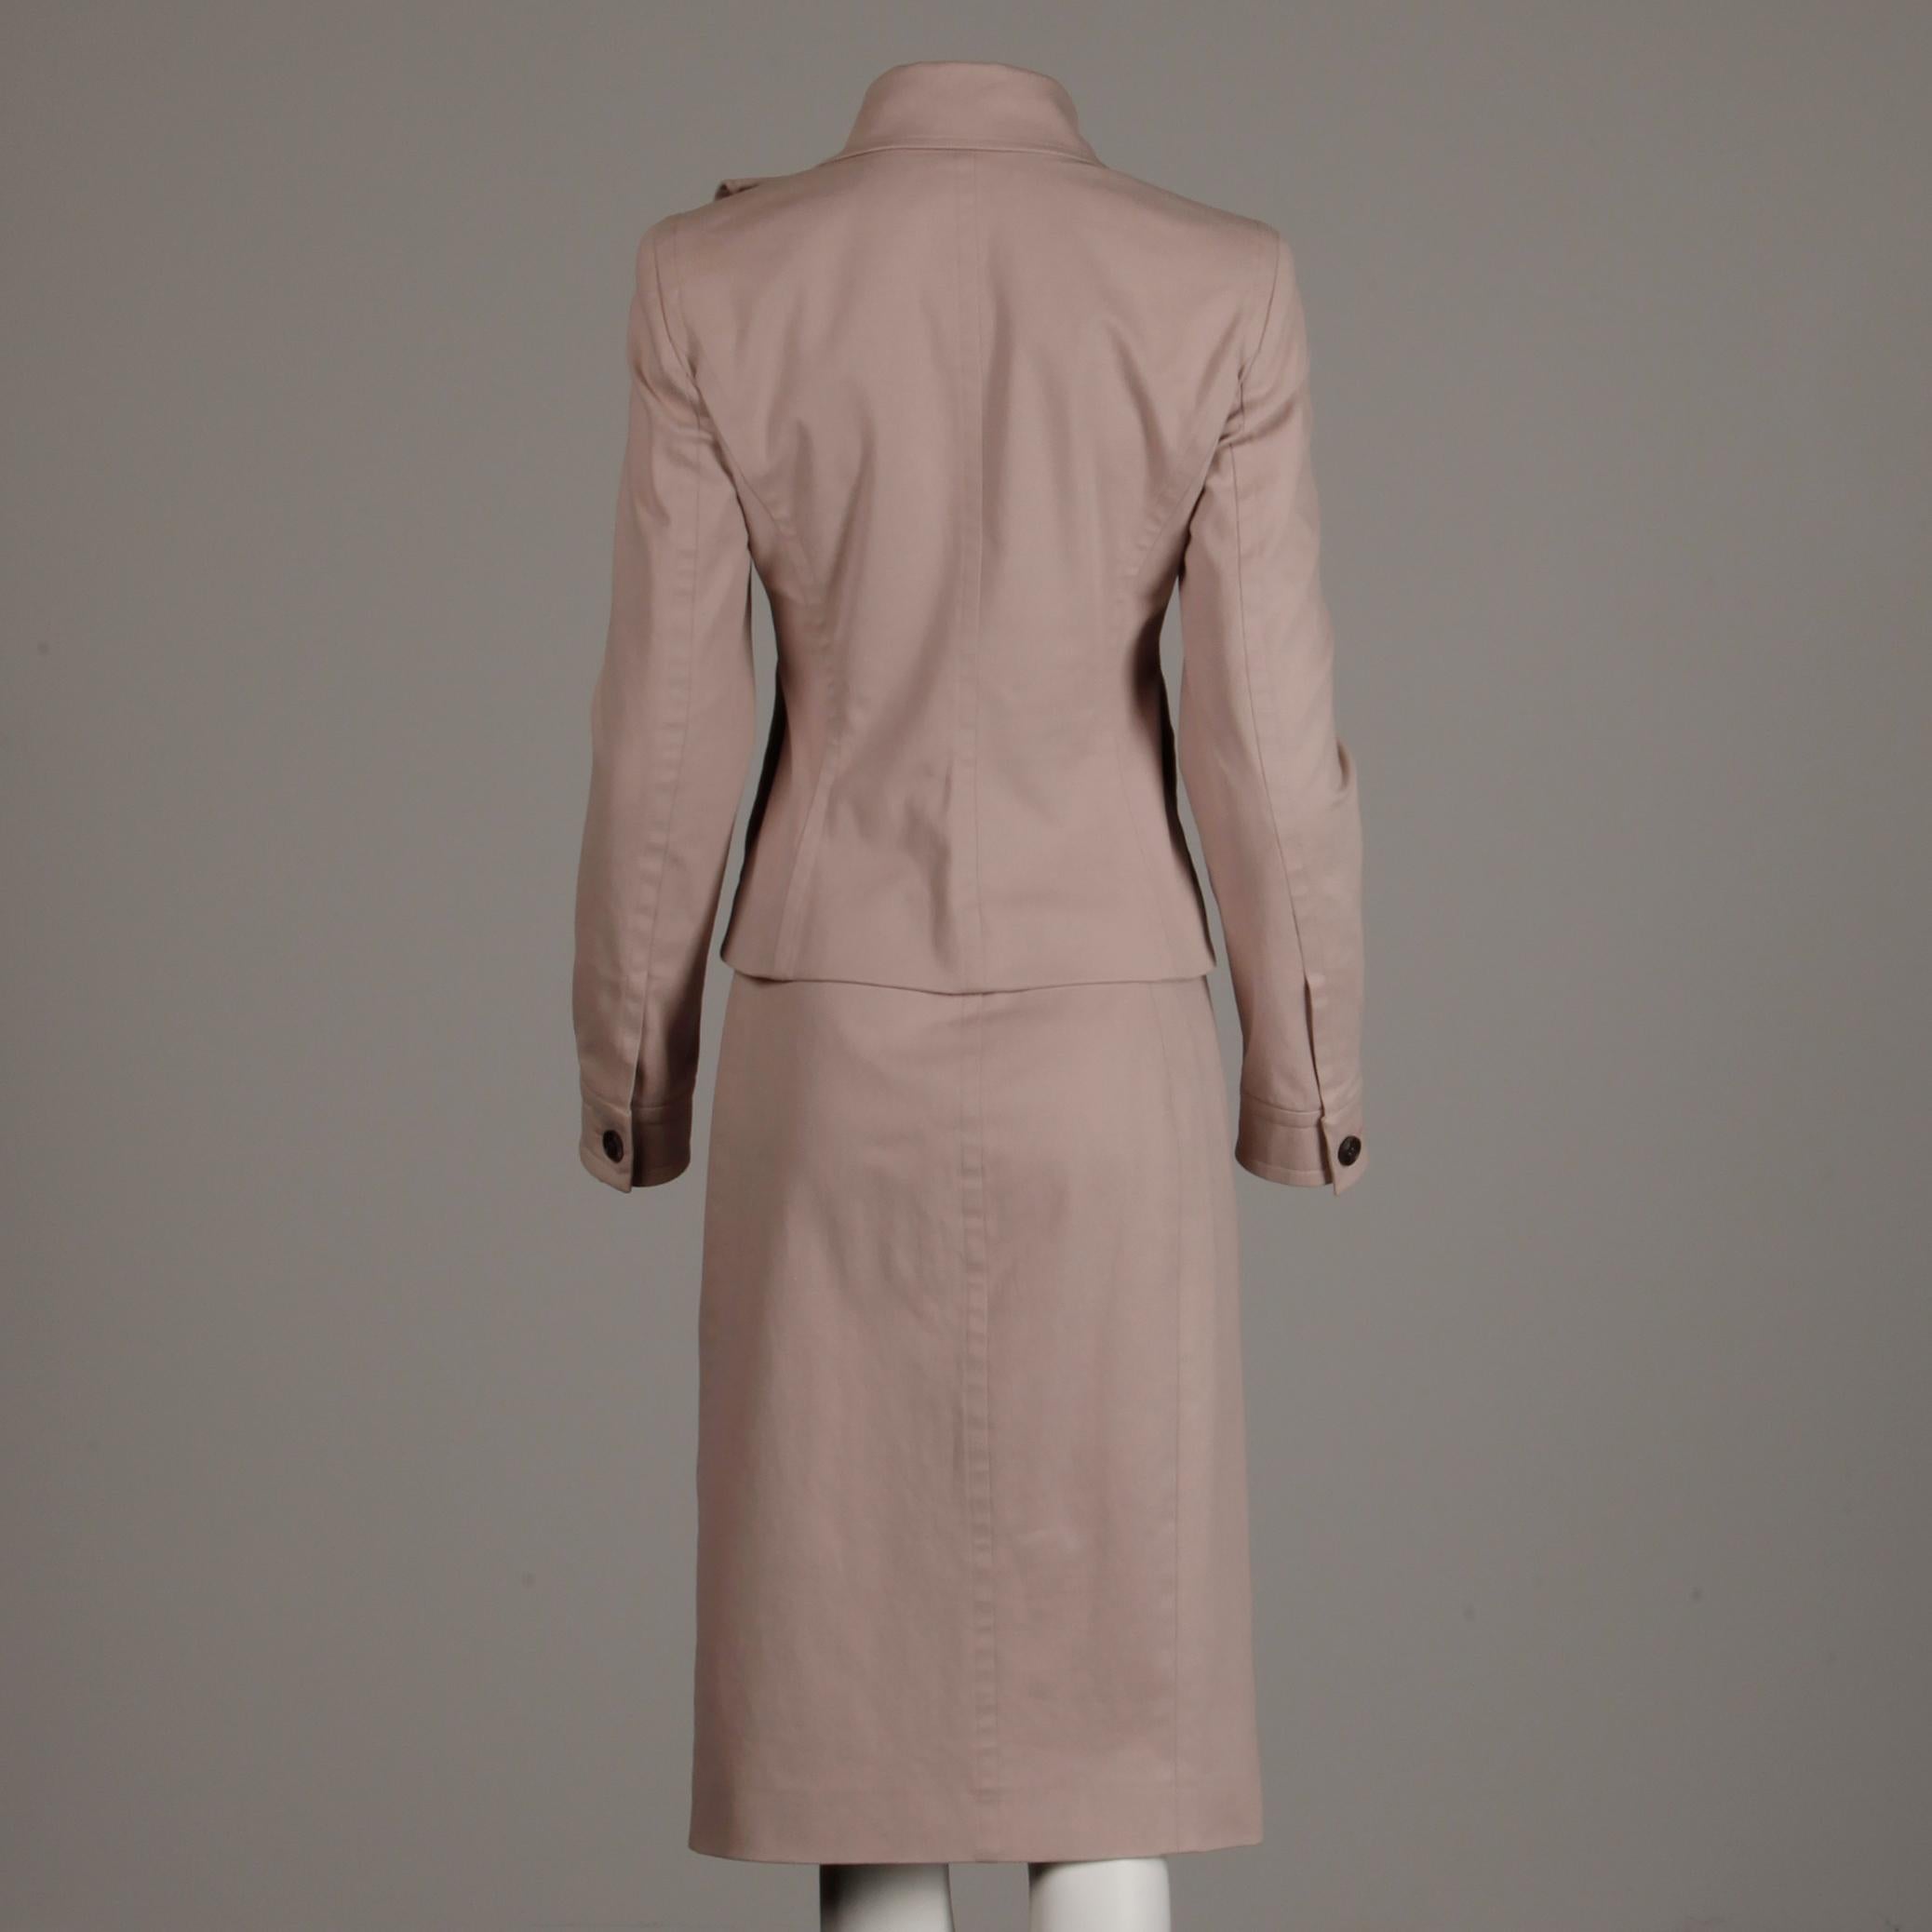 2003 Yves Saint Laurent by Tom Ford Pink Ruffle Jacket + Skirt Suit Ensemble YSL For Sale 7